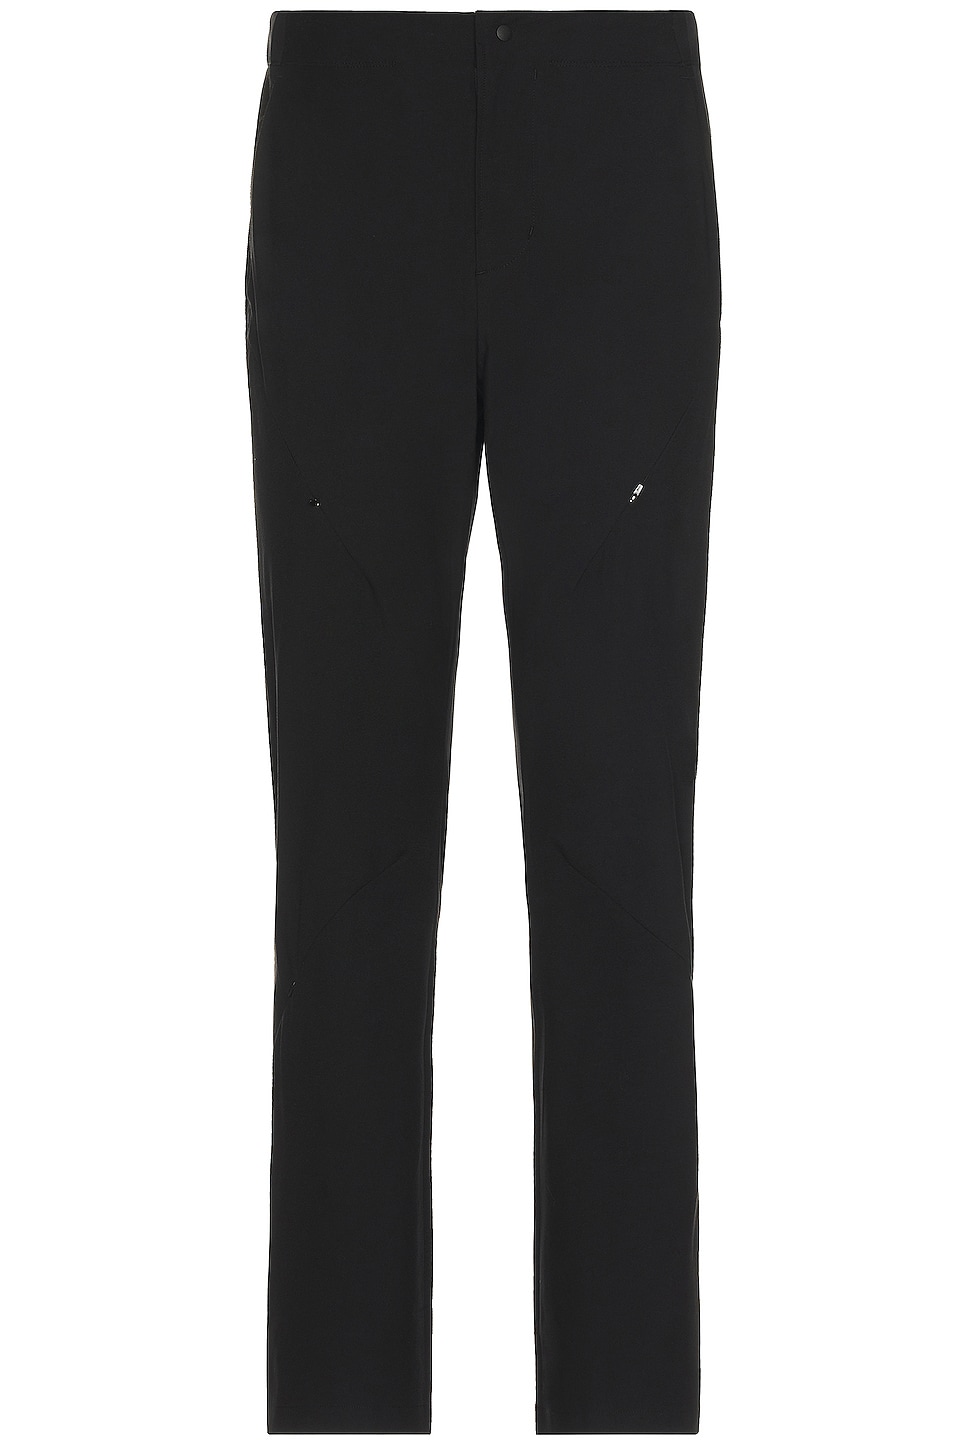 Image 1 of POST ARCHIVE FACTION (PAF) 5.1 Technical Pants Right in BLACK